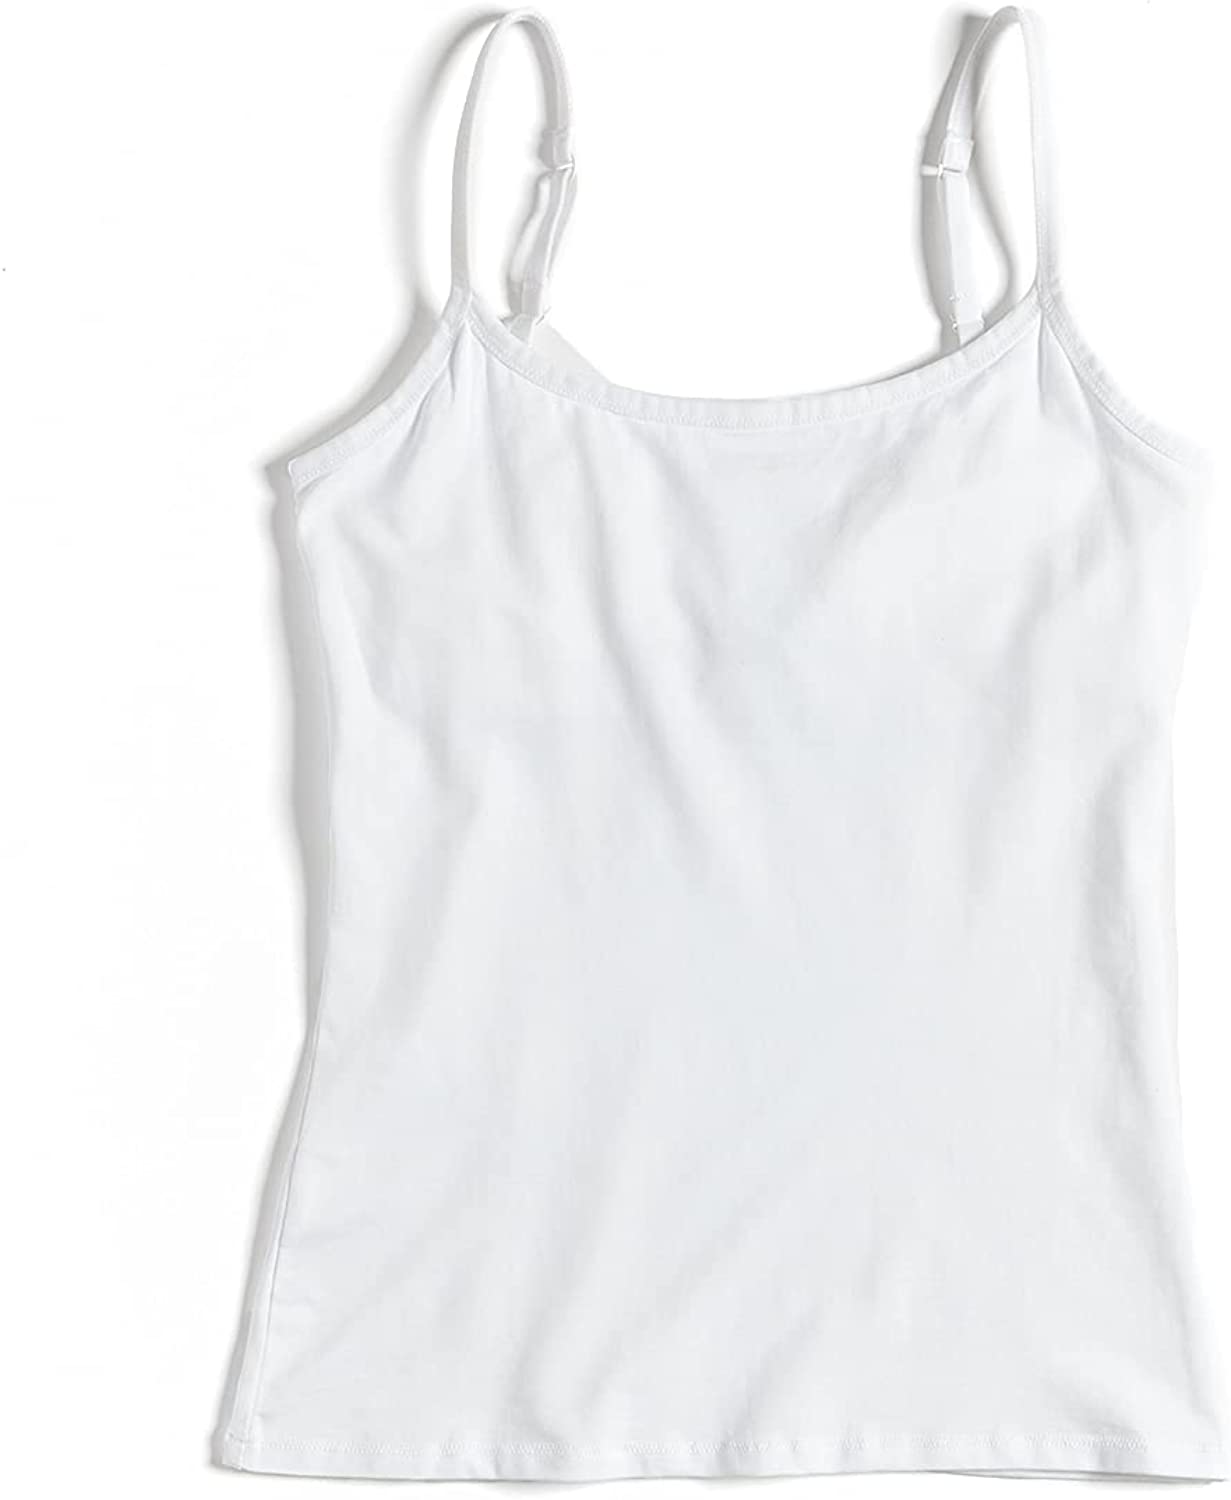 Womens Organic Cotton Camisole Tank Top With Built-in Shelf Bra